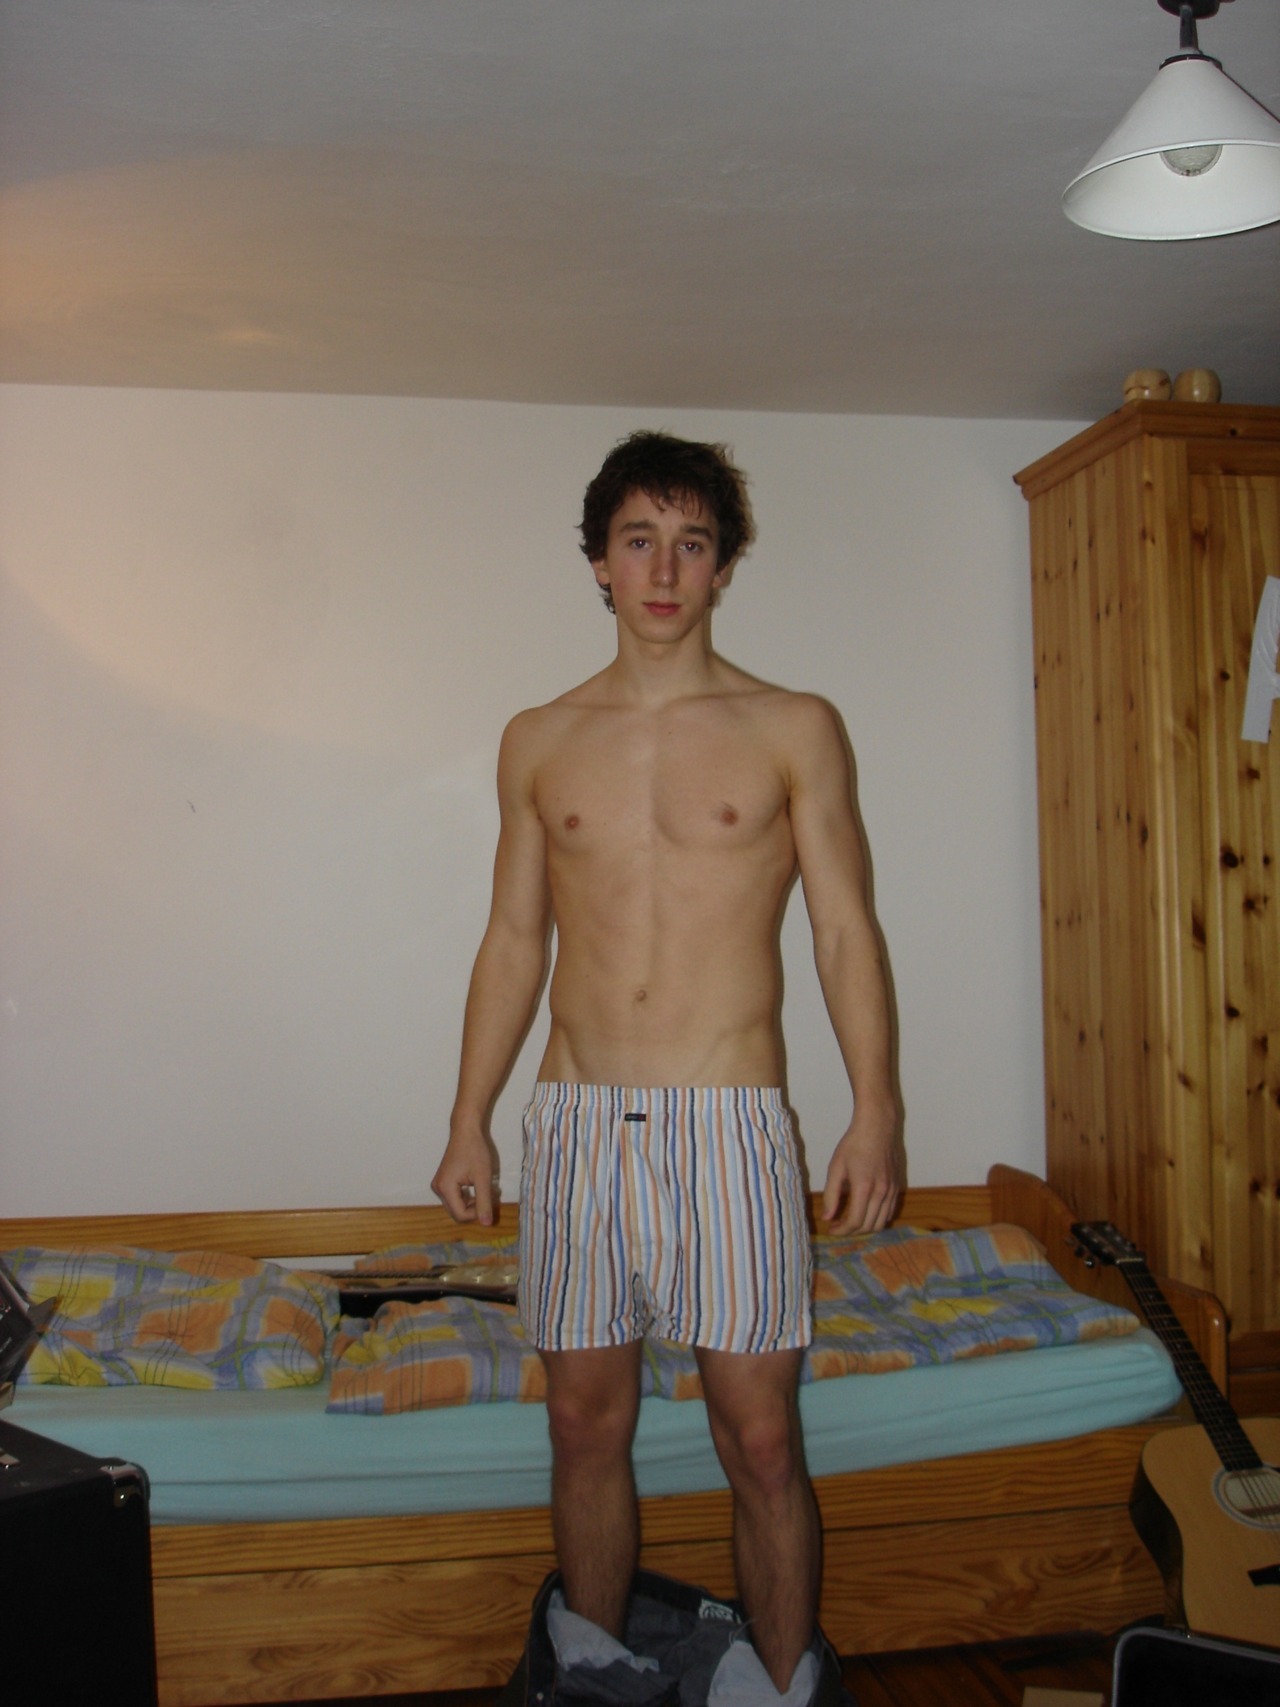 bestcuteguys:  -  His roommate was so well conditioned by now that all he had to